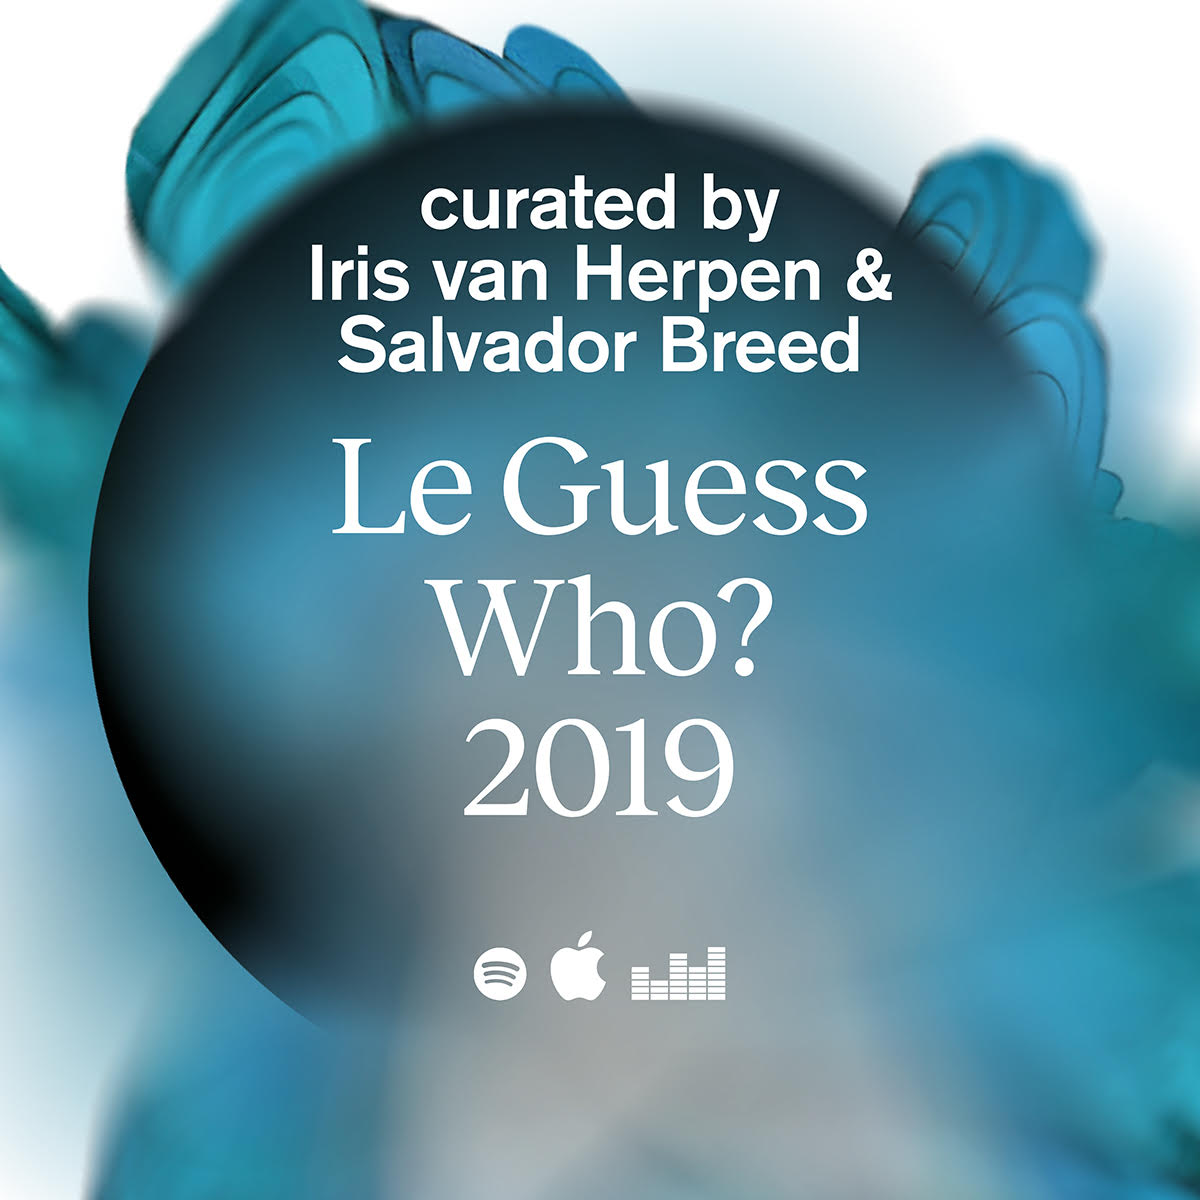 Explore Iris van Herpen & Salvador Breed's curation at LGW19 with their exclusive playlist